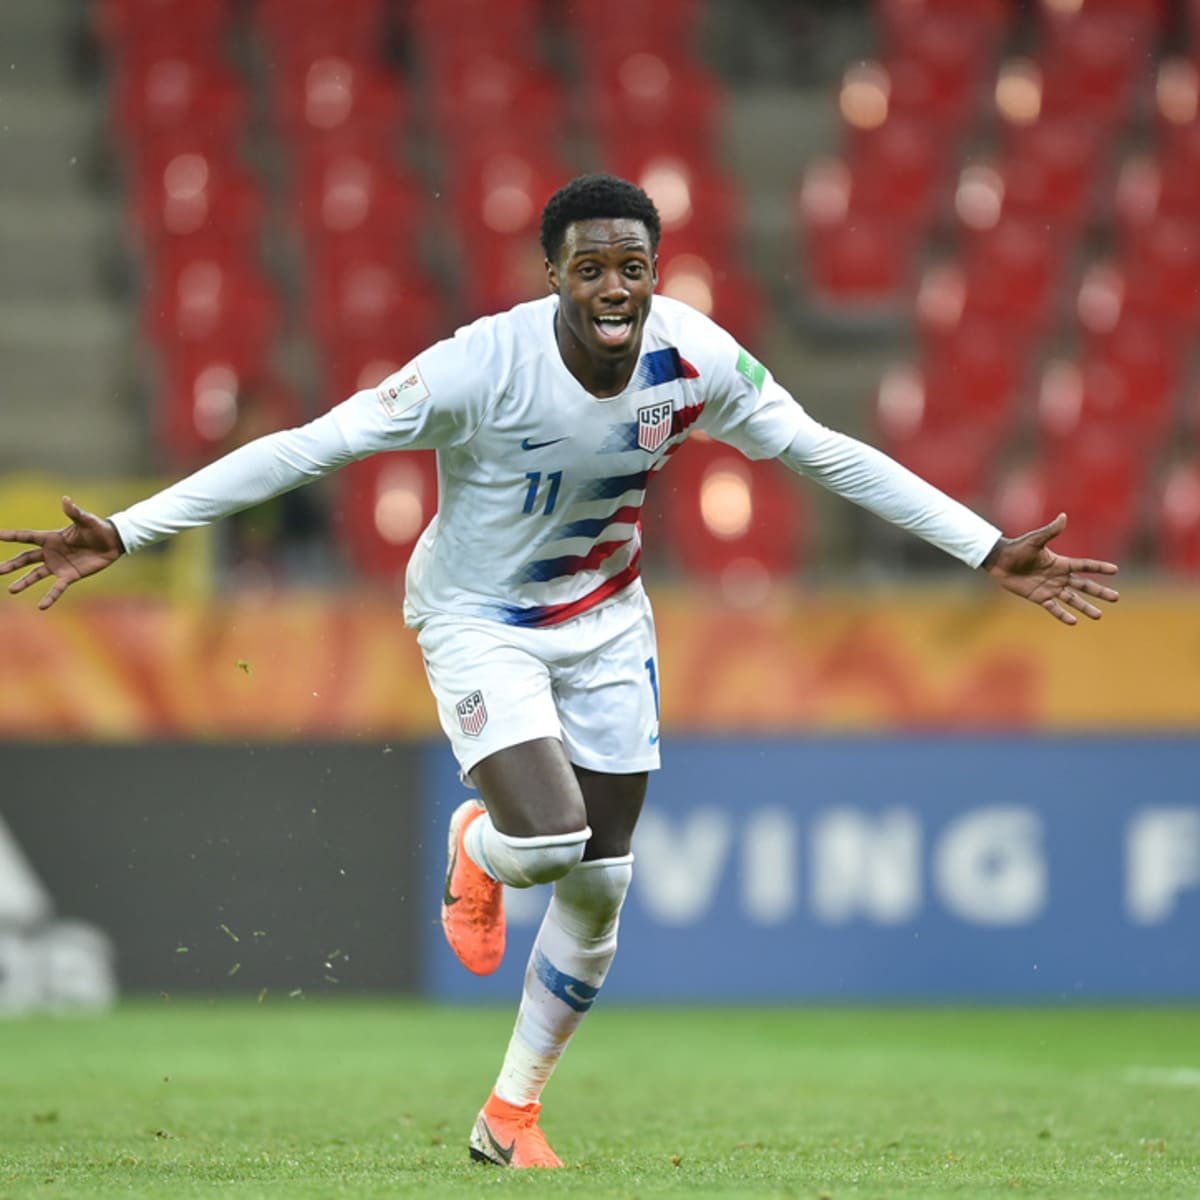 Tim Weah LW/F (2000) - transferred to Lille for 10mln€, this season has been wasted by injuriesSebastian Soto, F (2000) - after the U-20 WC he was permanently promoted to the first team of Hannover 96; from July 1, probably join Norwich City #USYNT  #USMNT 